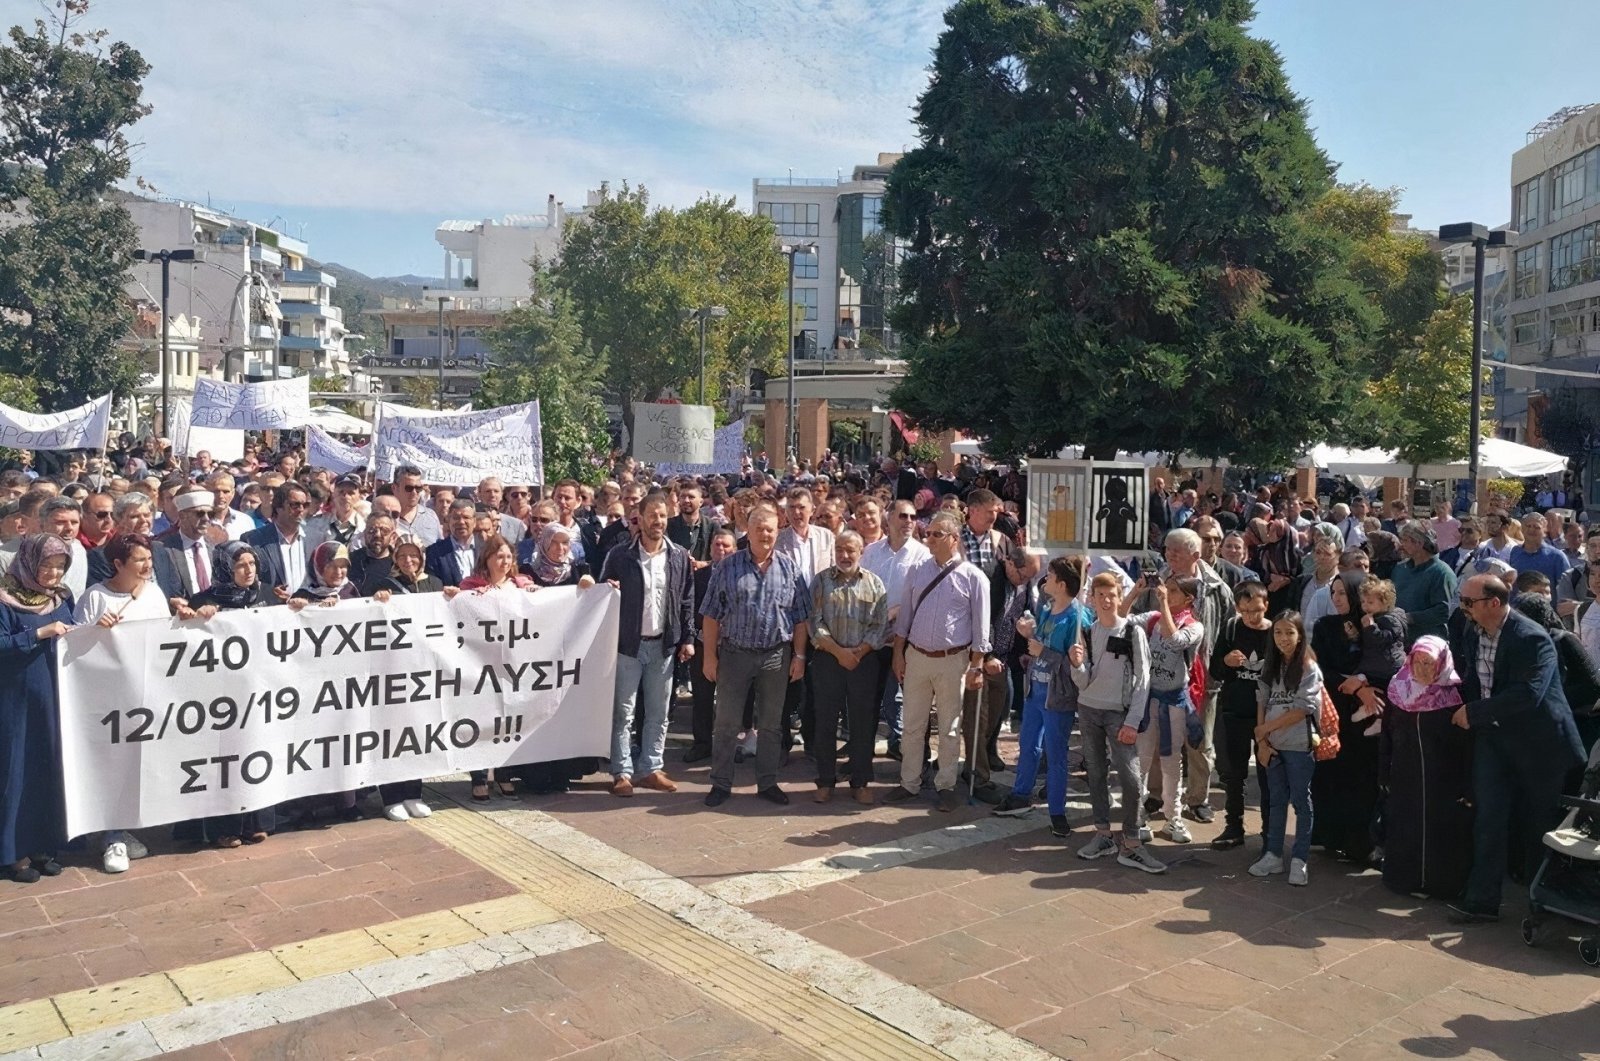 Turks in Western Thrace&#039;s Iskeçe (Xanthi) province protest Greek government&#039;s assimilation policies in education, Iskeçe (Xanthi), Western Thrace, Greece, Sept. 24, 2019. (Sabah Photo)